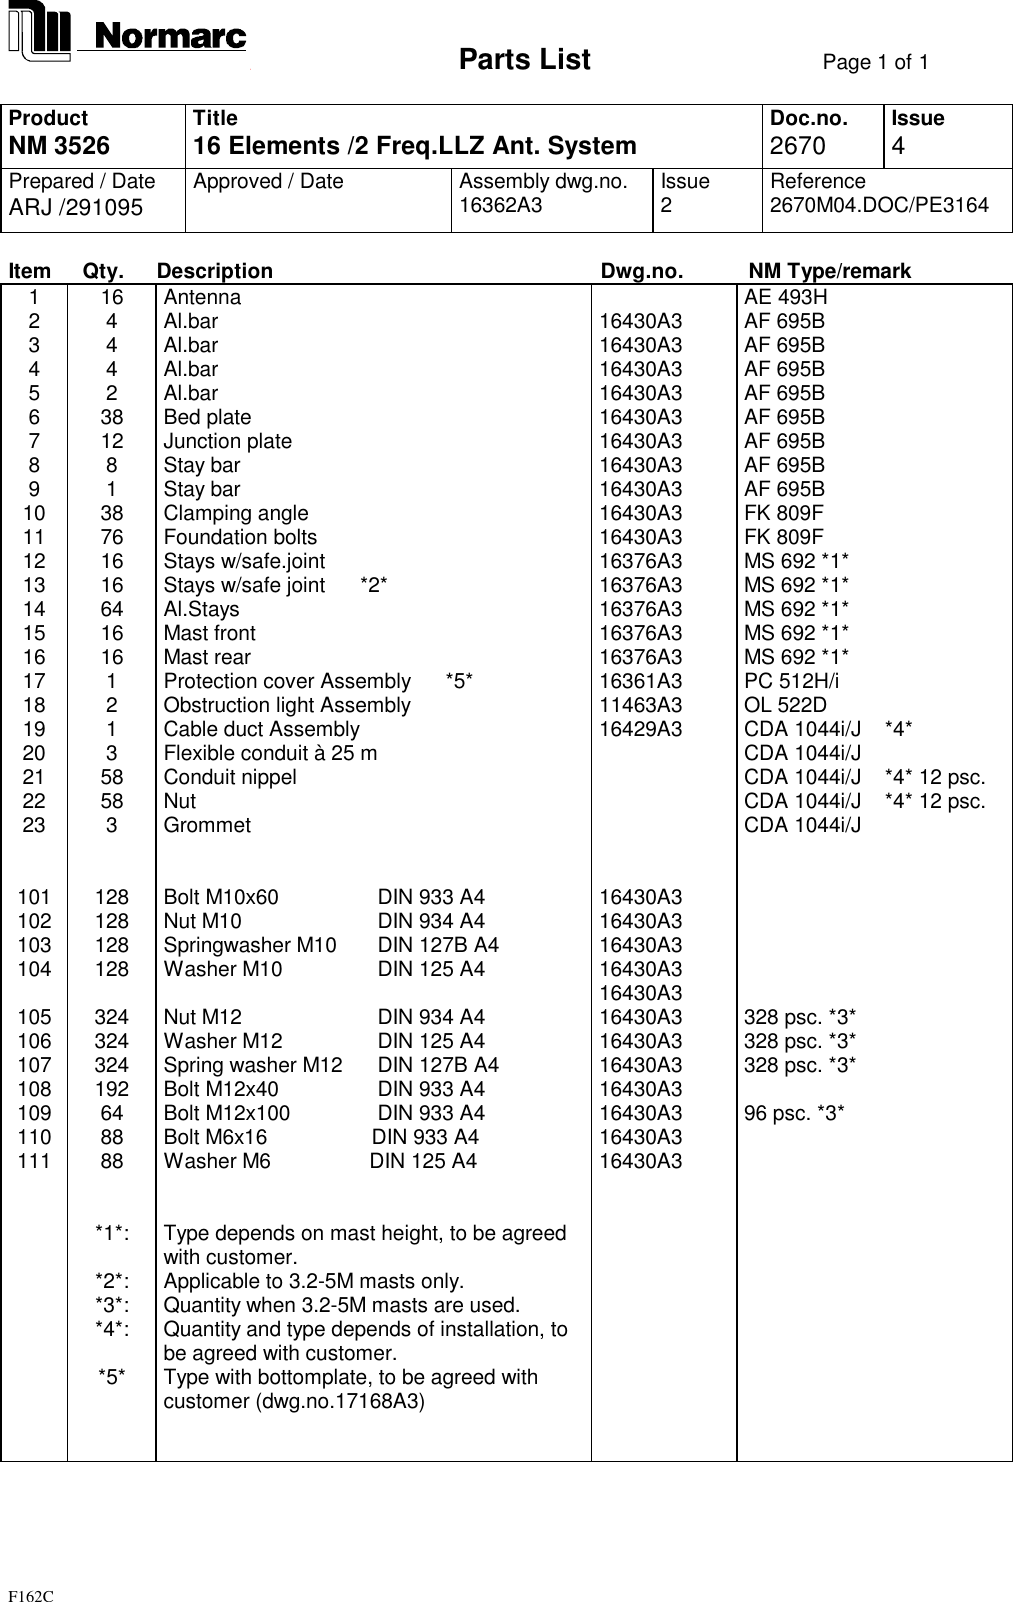                             Parts List Page 1 of 1F162CProductNM 3526 Title16 Elements /2 Freq.LLZ Ant. System Doc.no.2670 Issue4Prepared / DateARJ /291095 Approved / Date Assembly dwg.no.16362A3 Issue2Reference2670M04.DOC/PE3164Item Qty. Description Dwg.no. NM Type/remark1 16 Antenna AE 493H2 4 Al.bar 16430A3 AF 695B3 4 Al.bar 16430A3 AF 695B4 4 Al.bar 16430A3 AF 695B5 2 Al.bar 16430A3 AF 695B6 38 Bed plate 16430A3 AF 695B7 12 Junction plate 16430A3 AF 695B8 8 Stay bar 16430A3 AF 695B9 1 Stay bar 16430A3 AF 695B10 38 Clamping angle 16430A3 FK 809F11 76 Foundation bolts 16430A3 FK 809F12 16 Stays w/safe.joint 16376A3 MS 692 *1*13 16 Stays w/safe joint      *2* 16376A3 MS 692 *1*14 64 Al.Stays 16376A3 MS 692 *1*15 16 Mast front 16376A3 MS 692 *1*16 16 Mast rear 16376A3 MS 692 *1*17 1 Protection cover Assembly      *5* 16361A3 PC 512H/i18 2 Obstruction light Assembly 11463A3 OL 522D19 1 Cable duct Assembly 16429A3 CDA 1044i/J    *4*20 3 Flexible conduit à 25 m CDA 1044i/J21 58 Conduit nippel CDA 1044i/J    *4* 12 psc.22 58 Nut CDA 1044i/J    *4* 12 psc.23 3 Grommet CDA 1044i/J101 128 Bolt M10x60     DIN 933 A4 16430A3102 128 Nut M10         DIN 934 A4 16430A3103 128 Springwasher M10    DIN 127B A4 16430A3104 128 Washer M10     DIN 125 A4 16430A316430A3105 324 Nut M12          DIN 934 A4 16430A3 328 psc. *3*106 324 Washer M12      DIN 125 A4 16430A3 328 psc. *3*107 324 Spring washer M12   DIN 127B A4 16430A3 328 psc. *3*108 192 Bolt M12x40       DIN 933 A4 16430A3109 64 Bolt M12x100     DIN 933 A4 16430A3 96 psc. *3*110 88 Bolt M6x16                  DIN 933 A4 16430A3111 88 Washer M6                 DIN 125 A4 16430A3*1*: Type depends on mast height, to be agreedwith customer.*2*: Applicable to 3.2-5M masts only.*3*: Quantity when 3.2-5M masts are used.*4*: Quantity and type depends of installation, tobe agreed with customer.*5* Type with bottomplate, to be agreed withcustomer (dwg.no.17168A3)